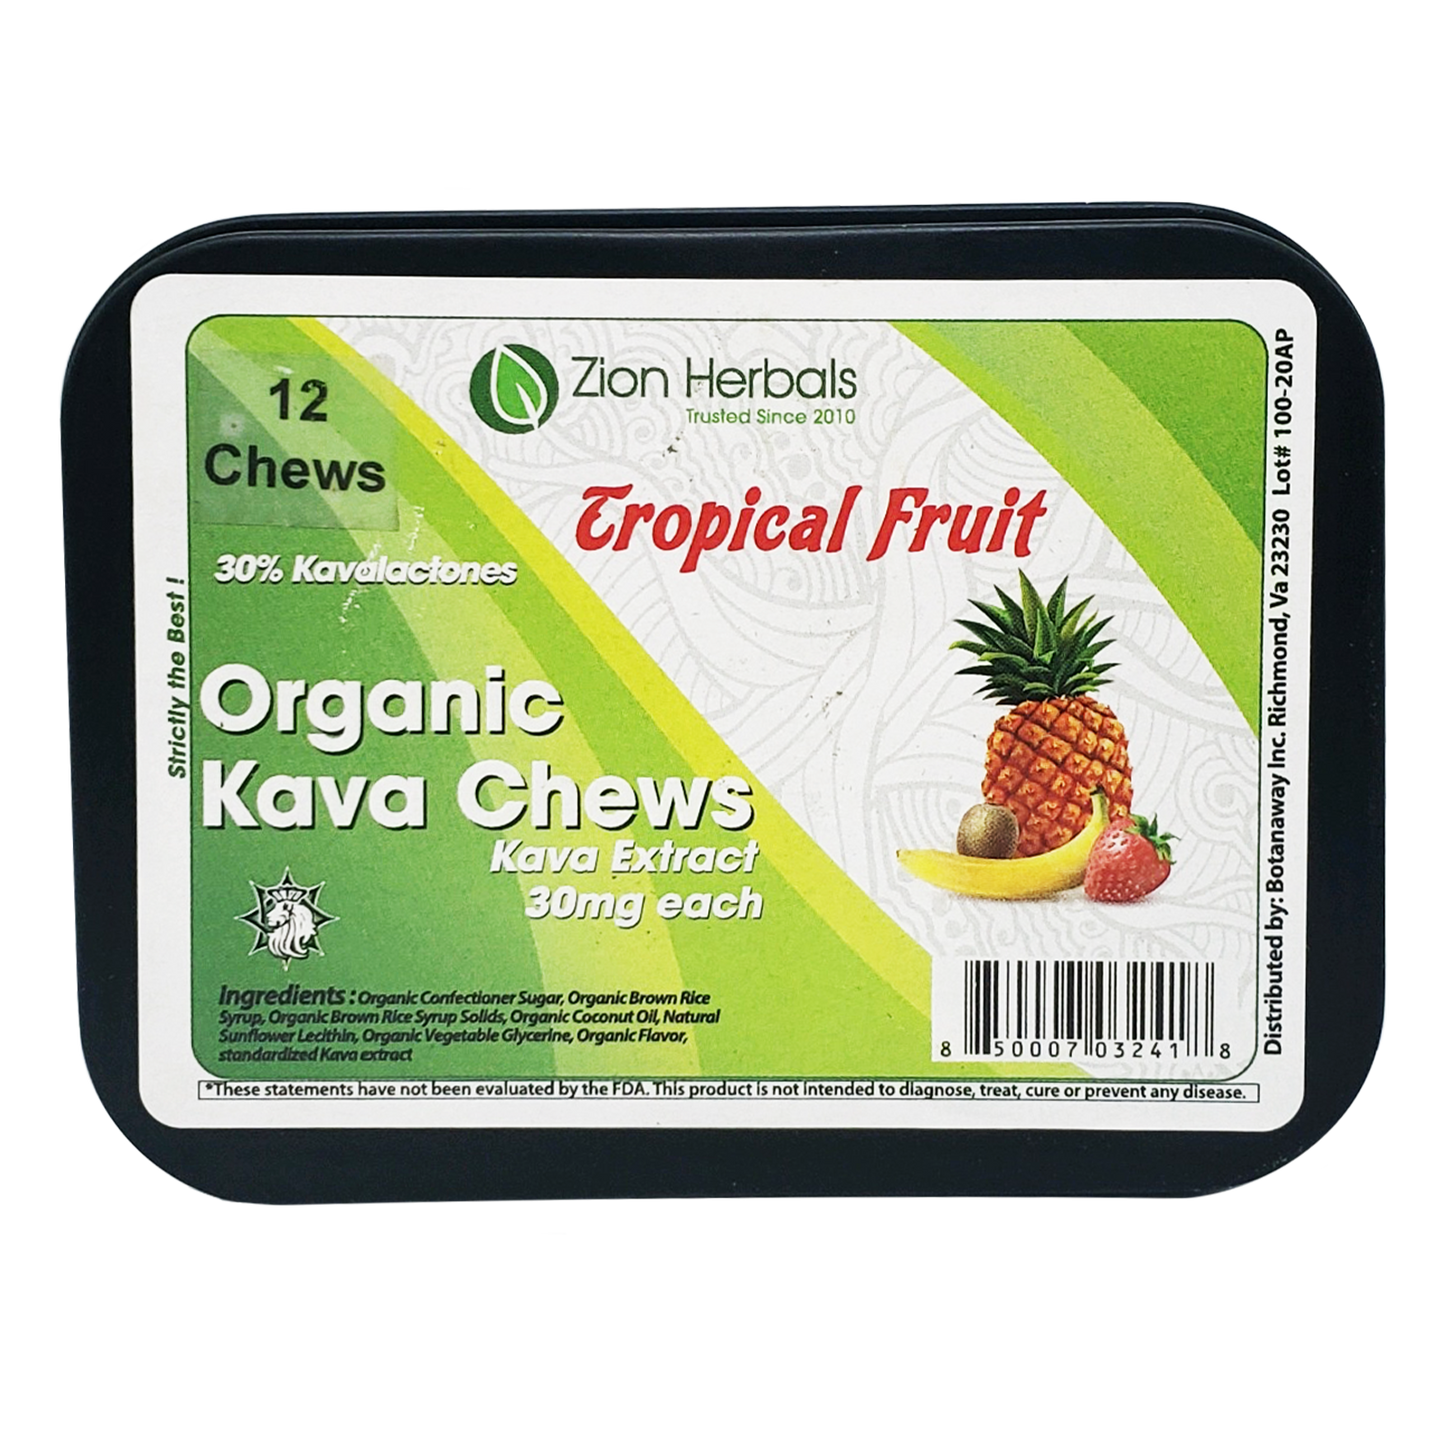 Zion Herbals 30mg Kava Extract Chews Tropical Fruit